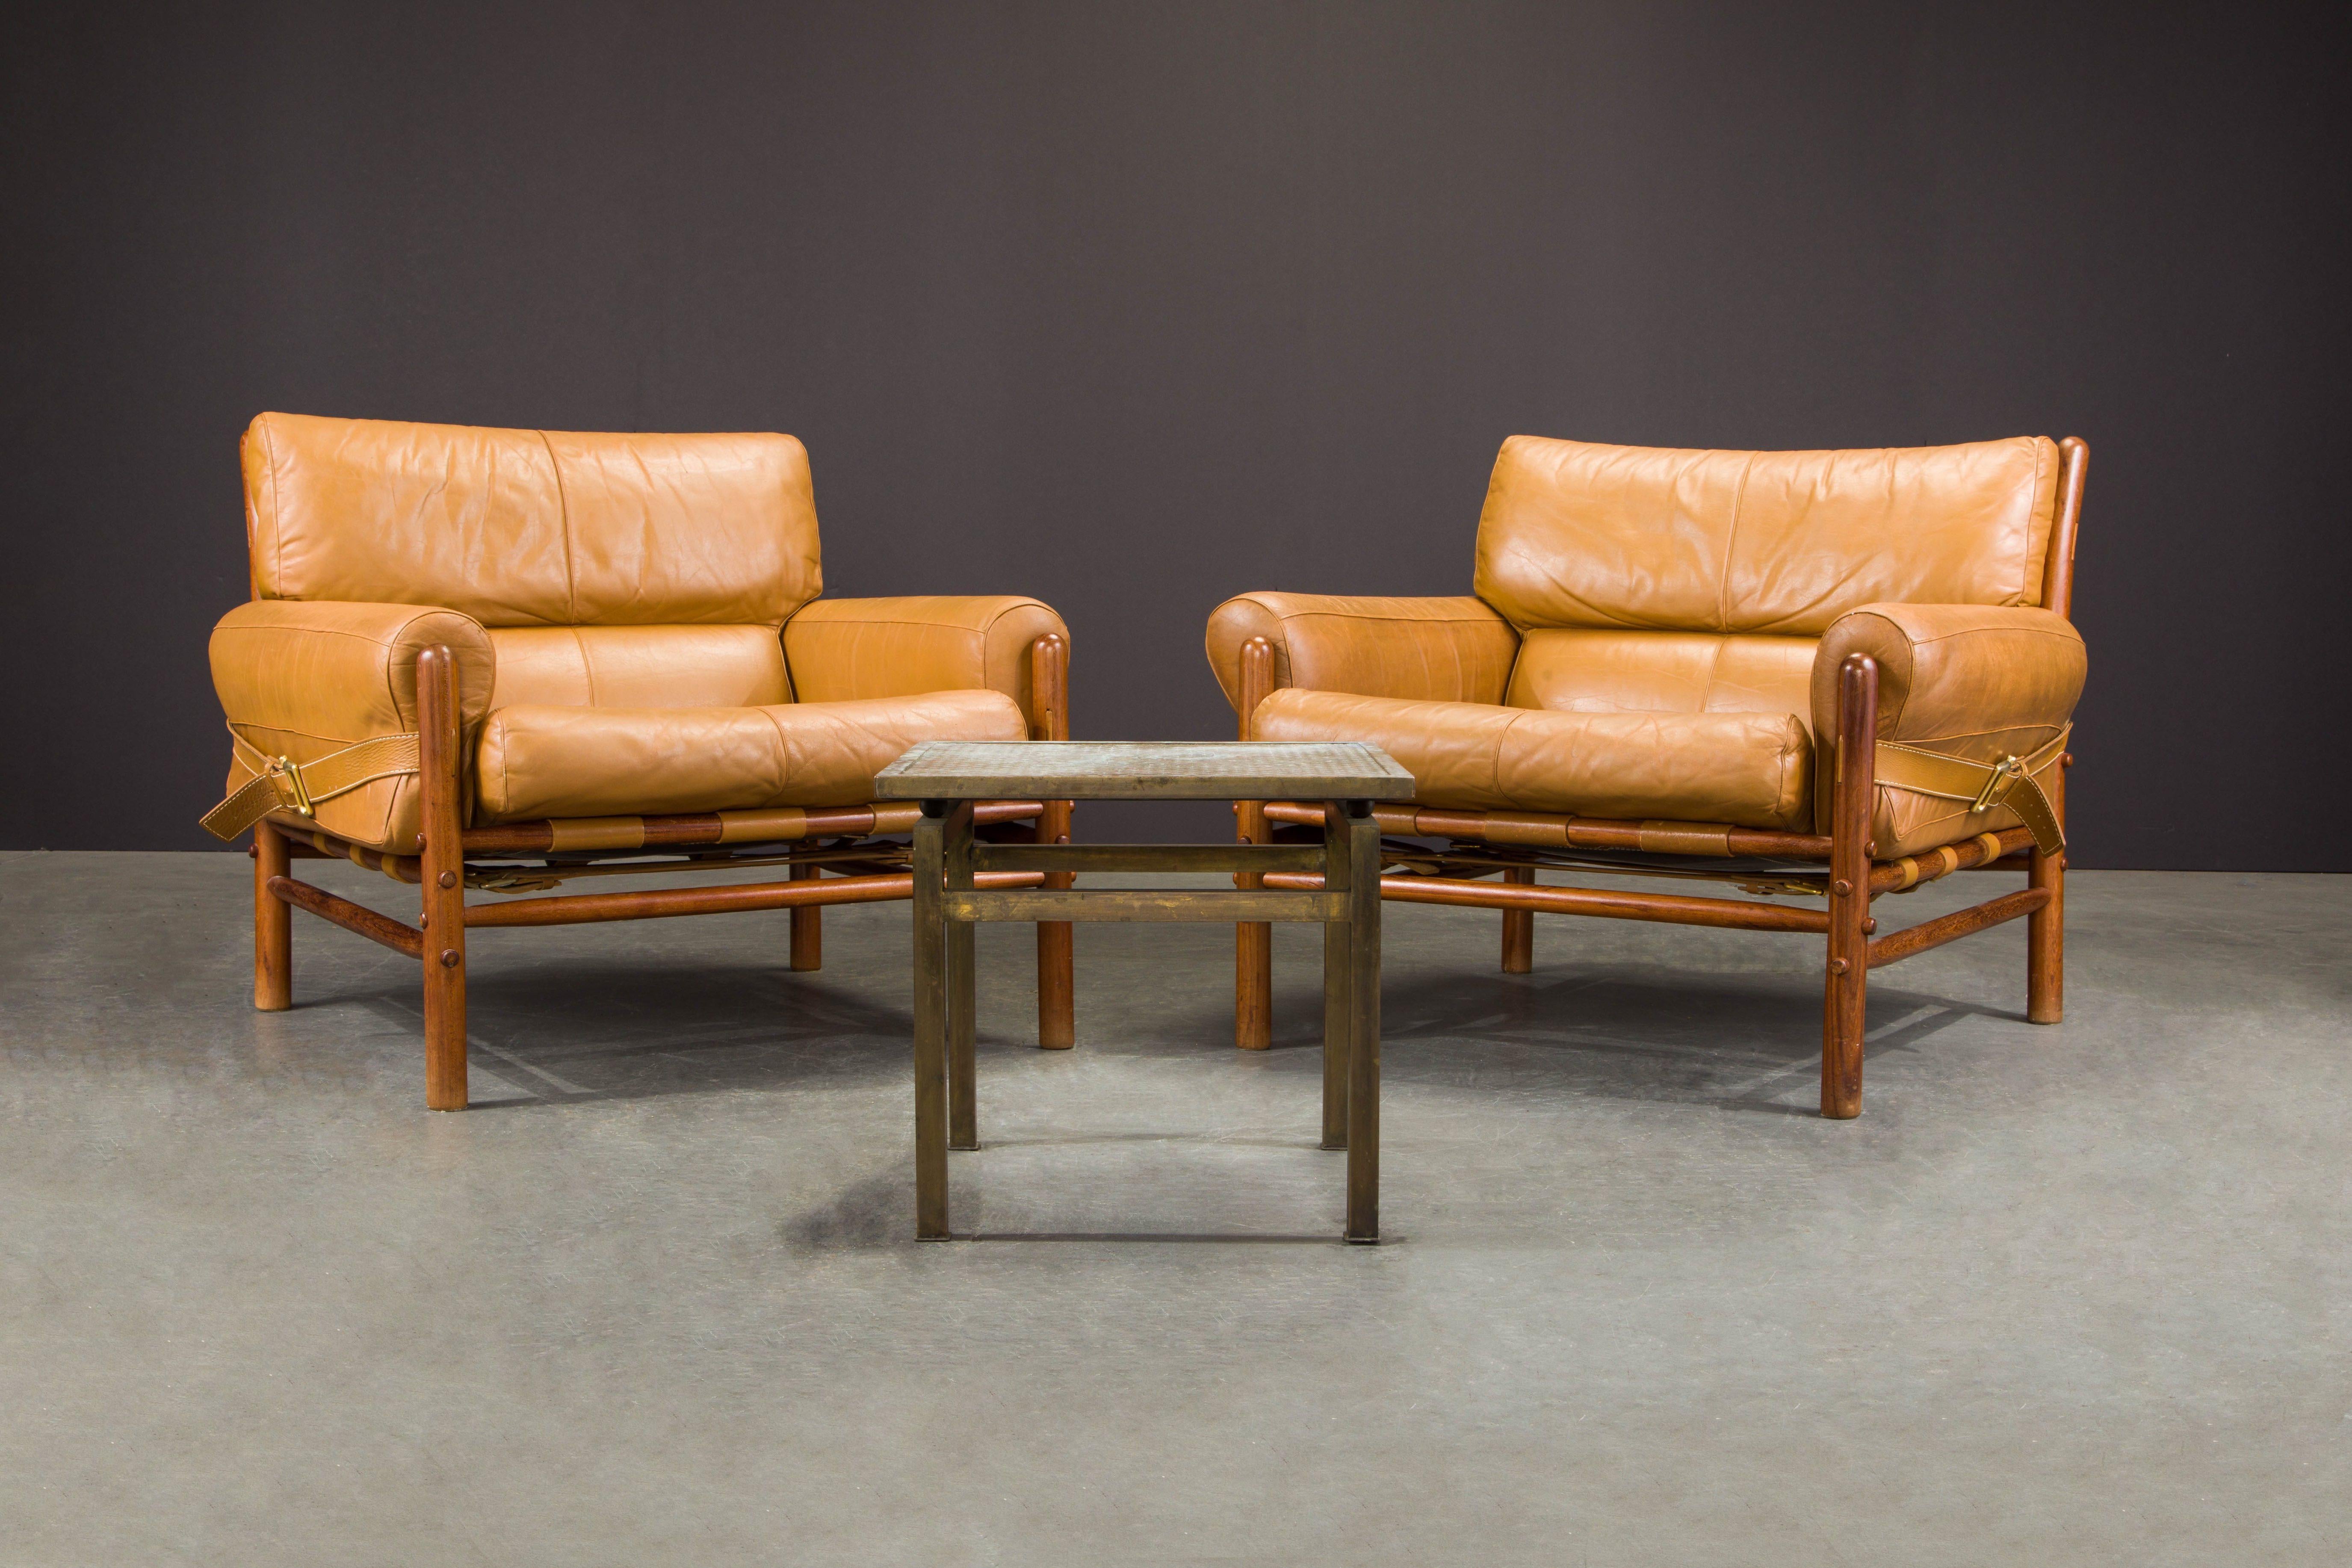 Colombian Pair of 'Kontiki' Leather Lounge Chairs by Arne Norell, 1970s, Signed